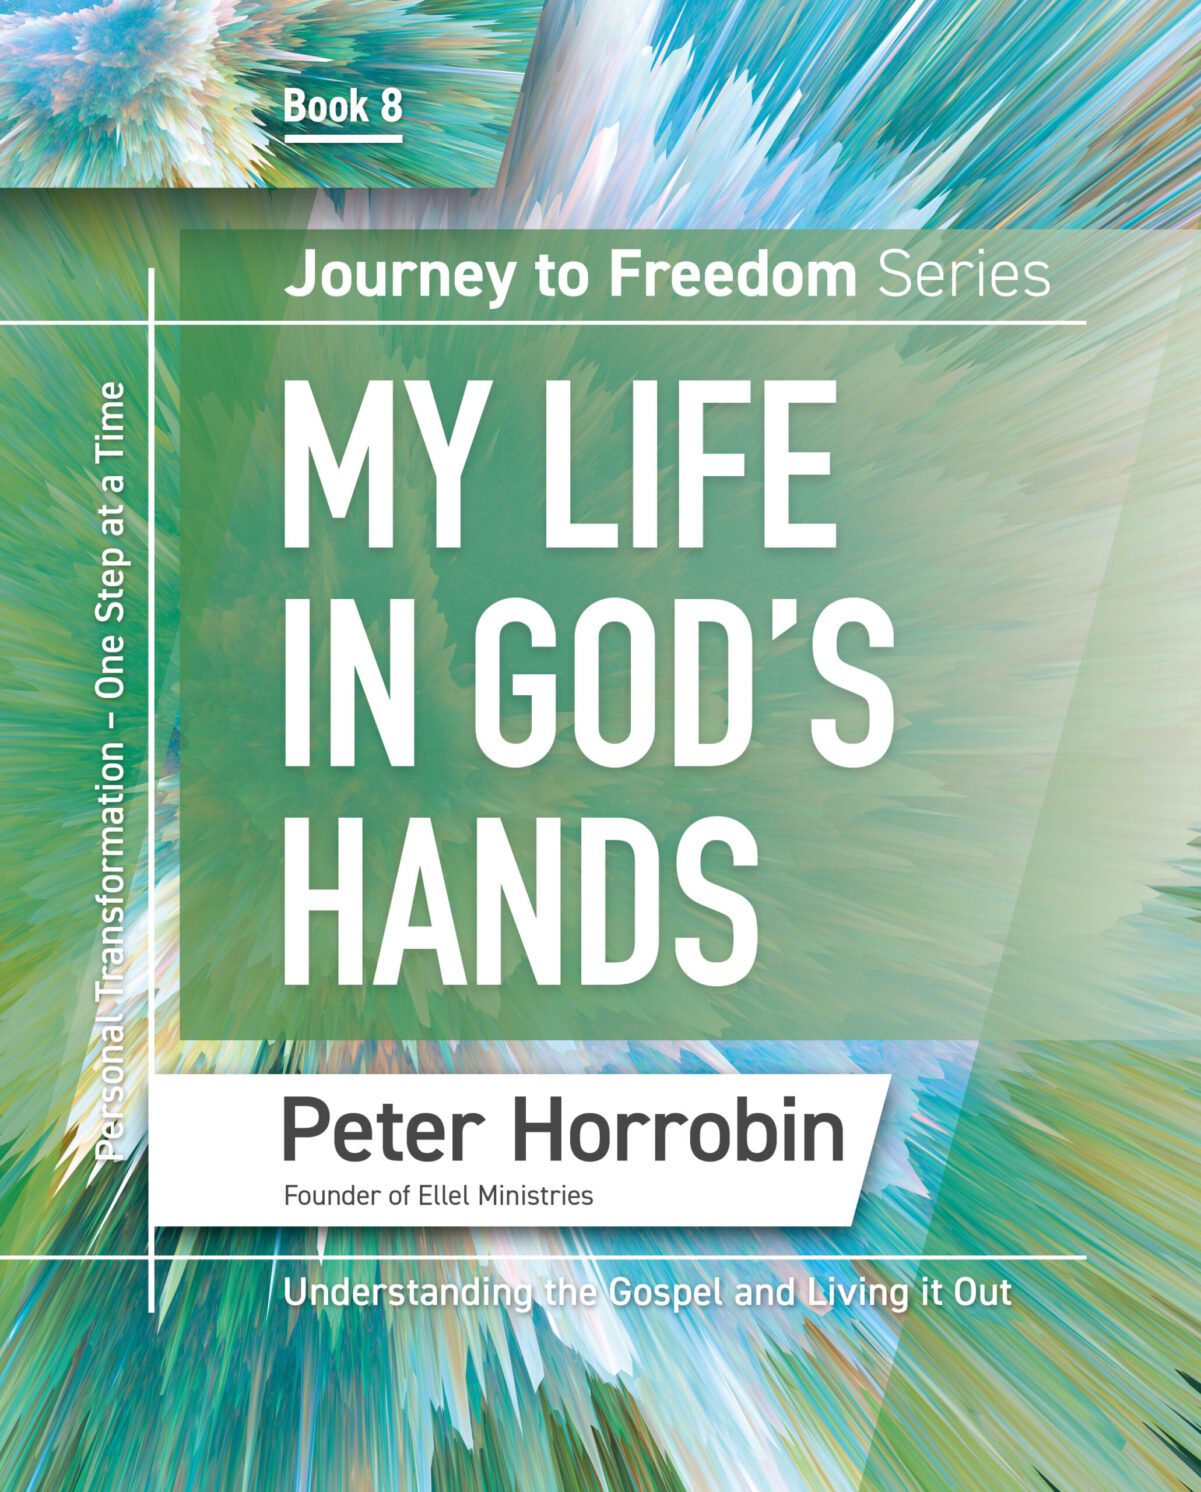 Journey to Freedom Book 8 – My Life in God’s Hands